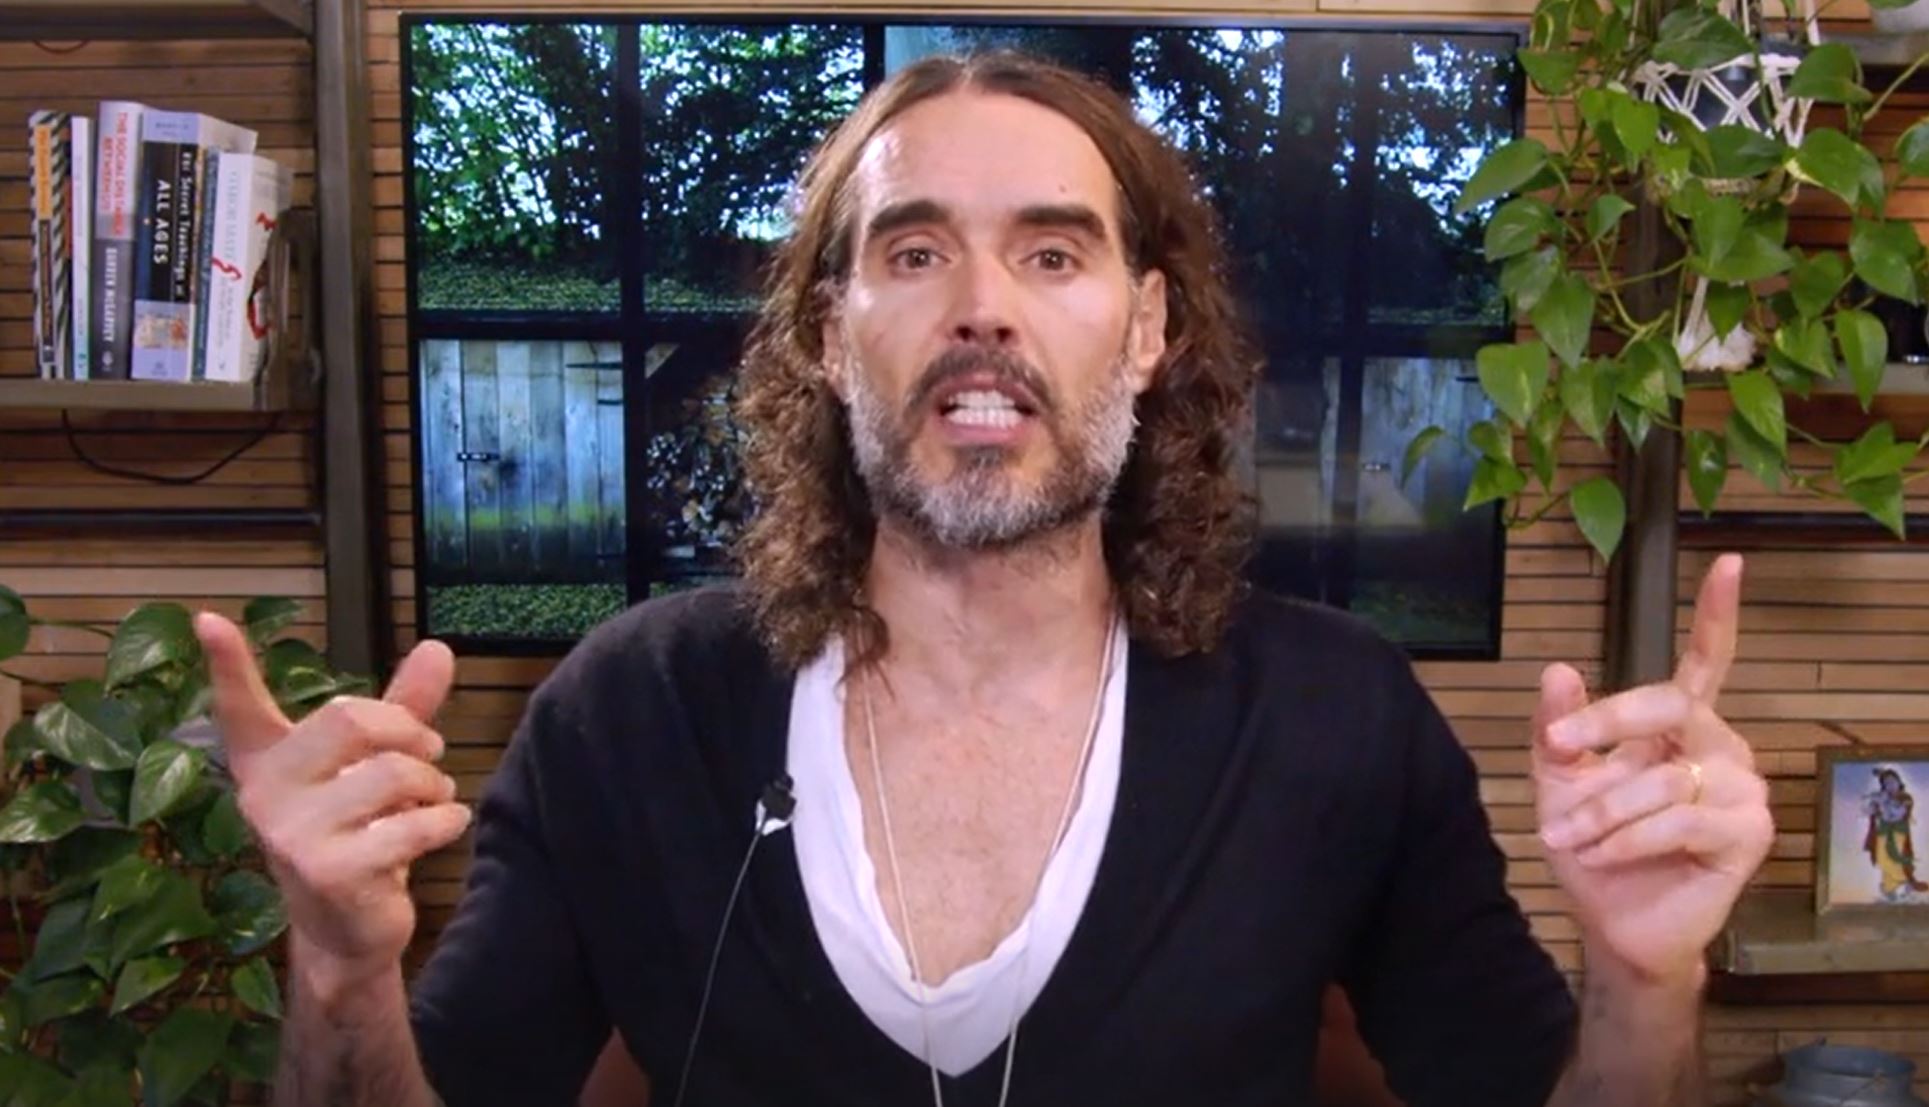 https://stratus.campaign-image.com/images/443466000139090128_zc_v1_1700015482106_russell_brand.jpg